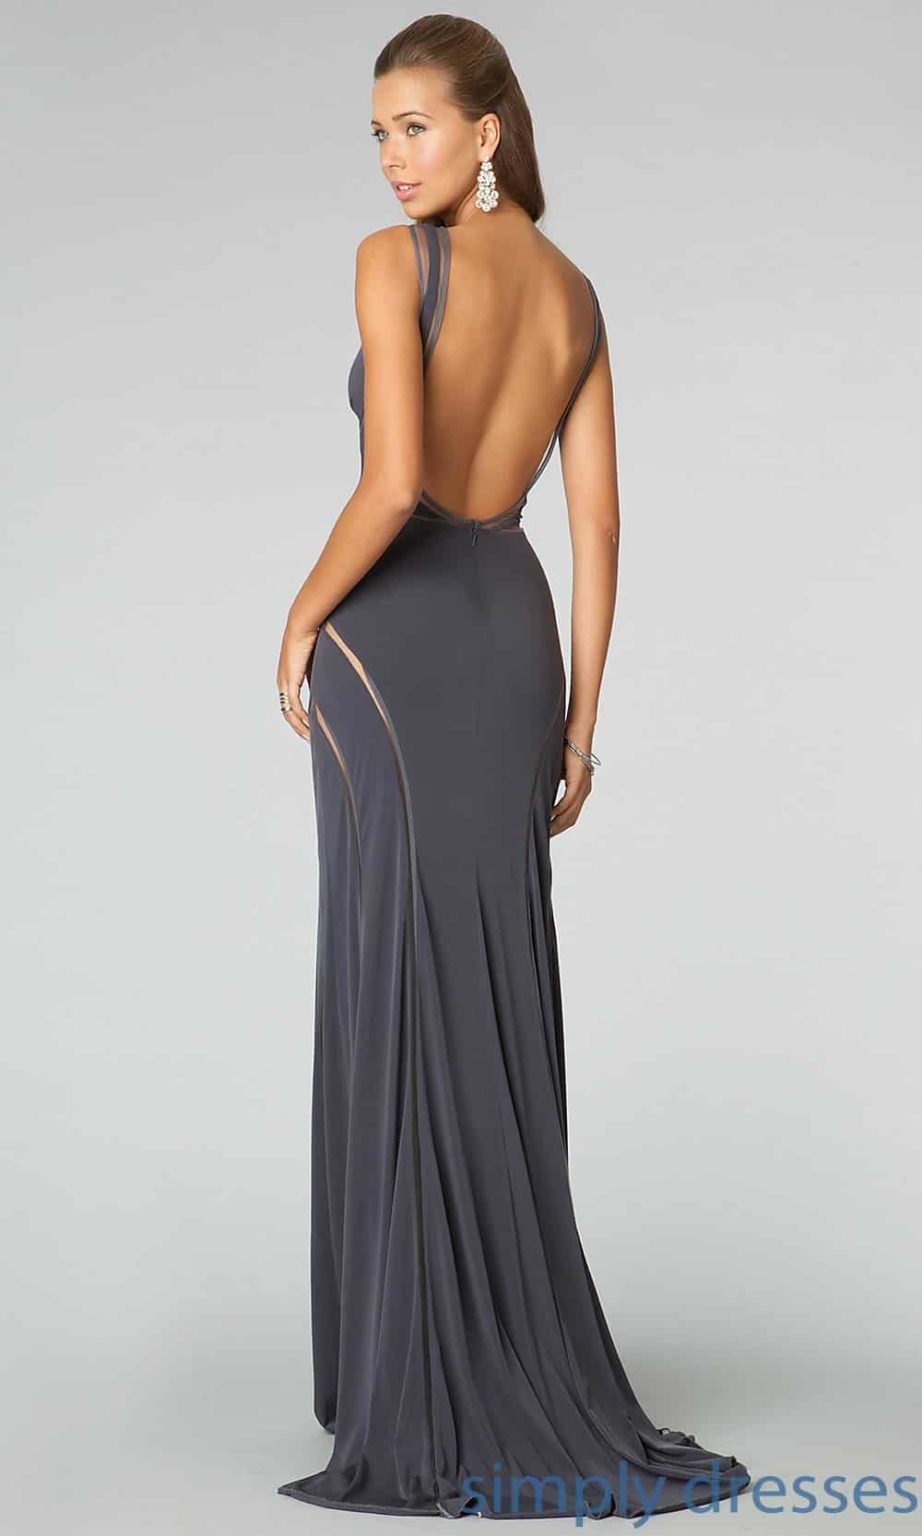 Stunning Open Back Dresses That Will Make Many Jaws Drop All For Fashion Design 